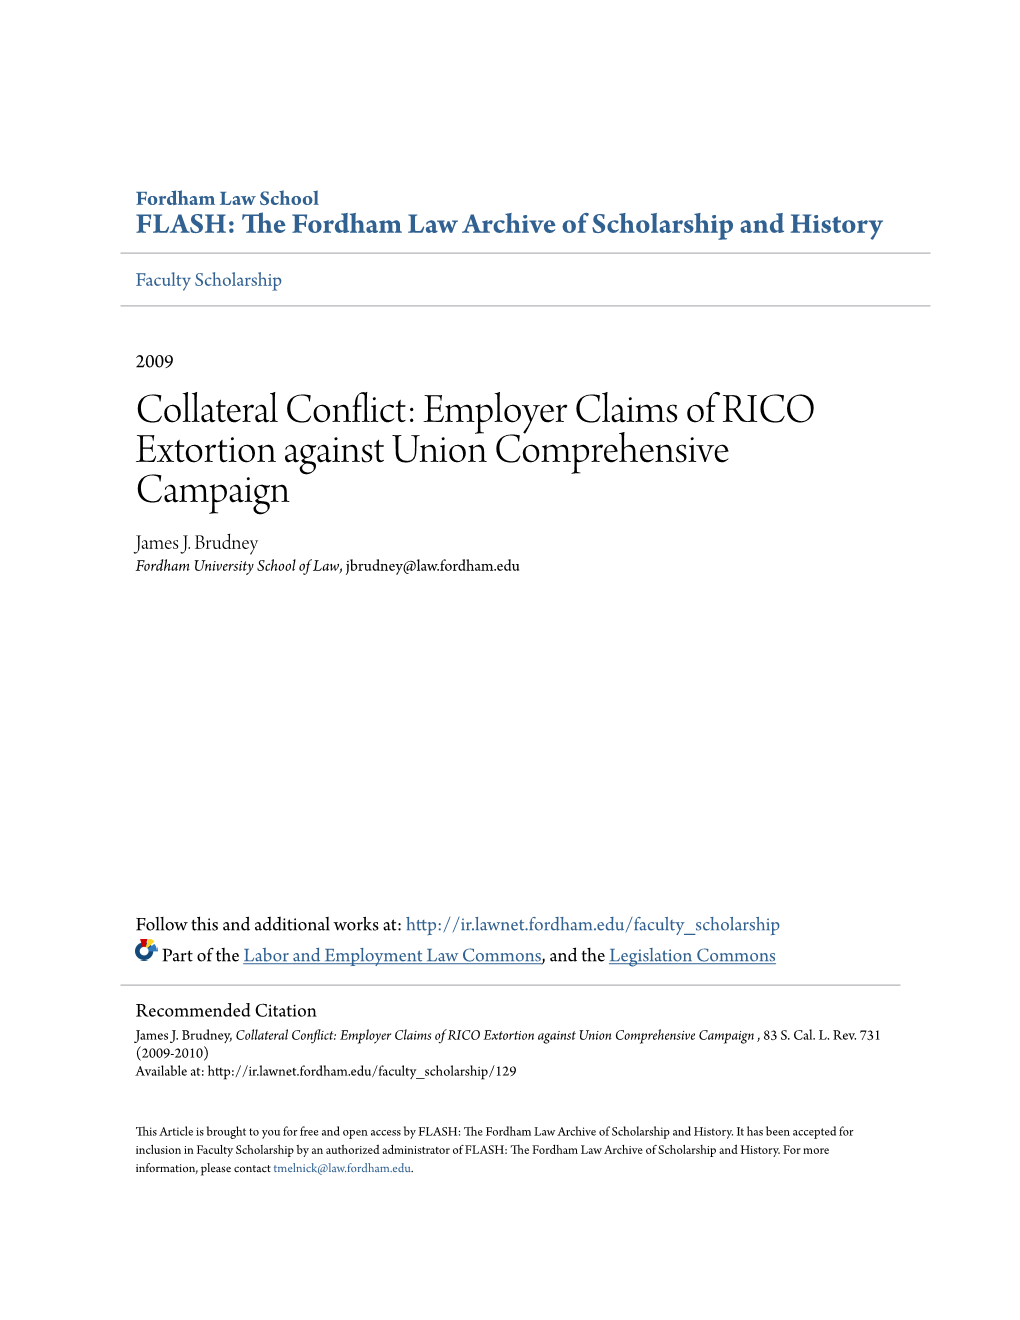 Employer Claims of RICO Extortion Against Union Comprehensive Campaign James J